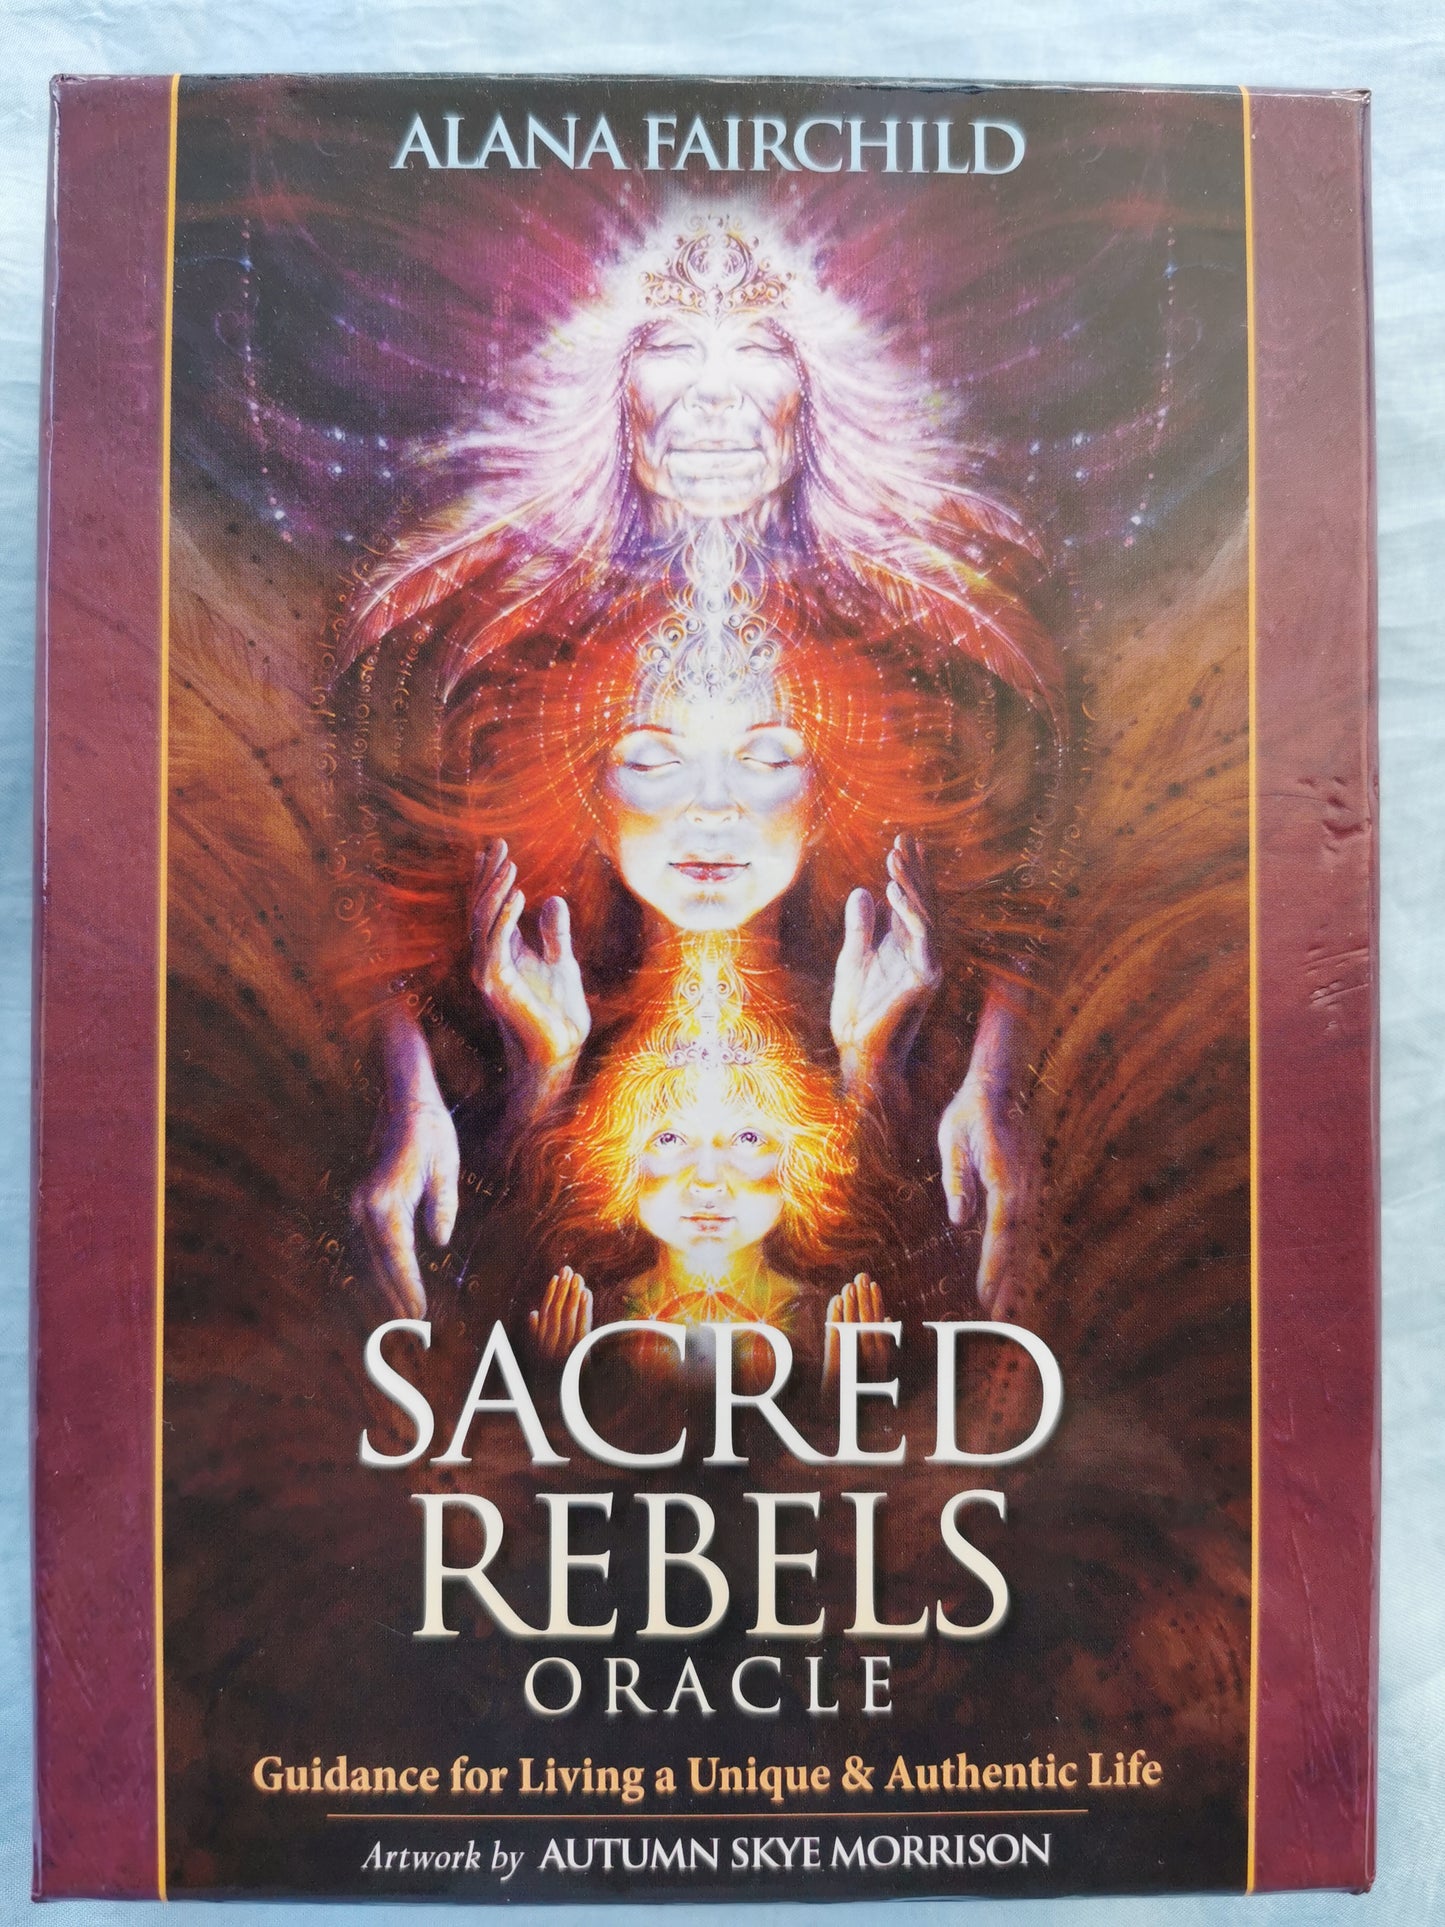 Sacred Rebels Oracle - Guidance for Living a Unique & Authentic Life